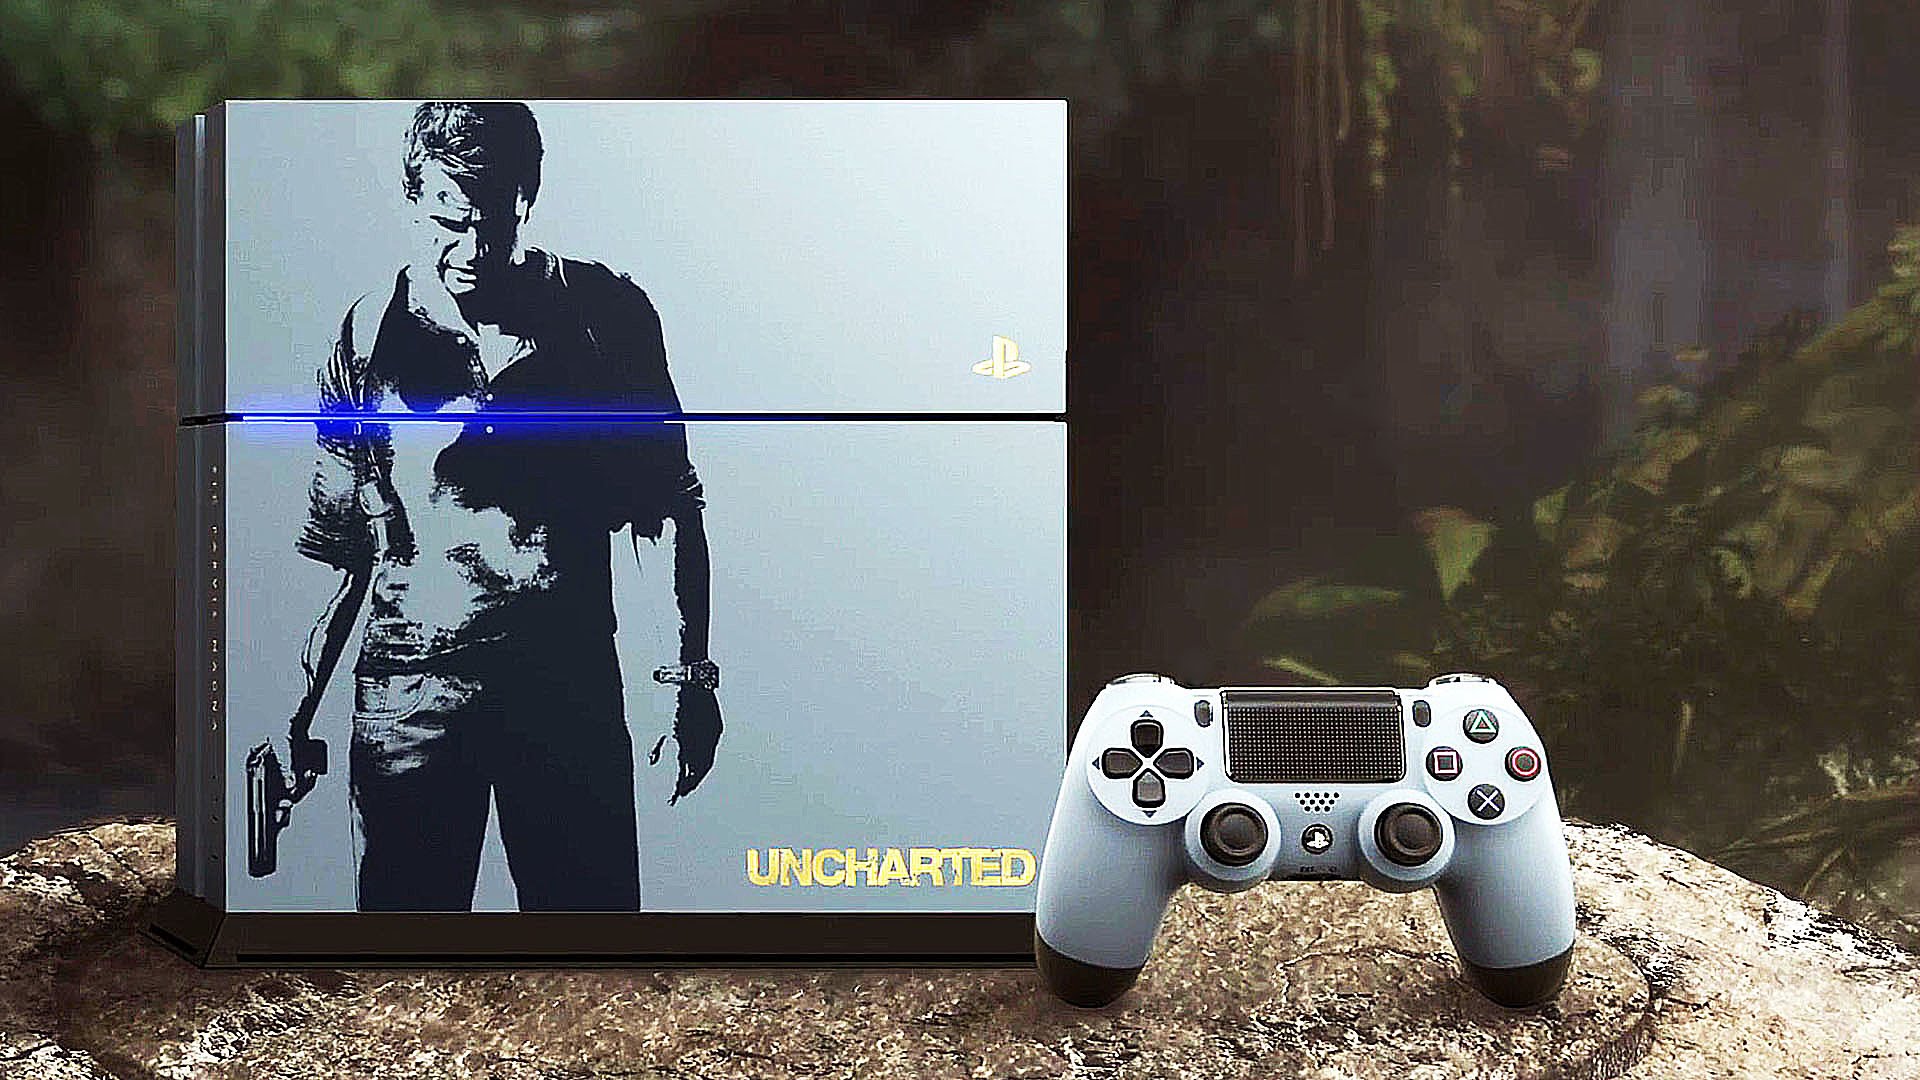 Ps4 ремонтundefined. Ps4 Uncharted 4 Limited. Uncharted PLAYSTATION 4 Limited Edition. Ps4 Uncharted 4 Limited Edition. Sony ps4 Uncharted 4:.